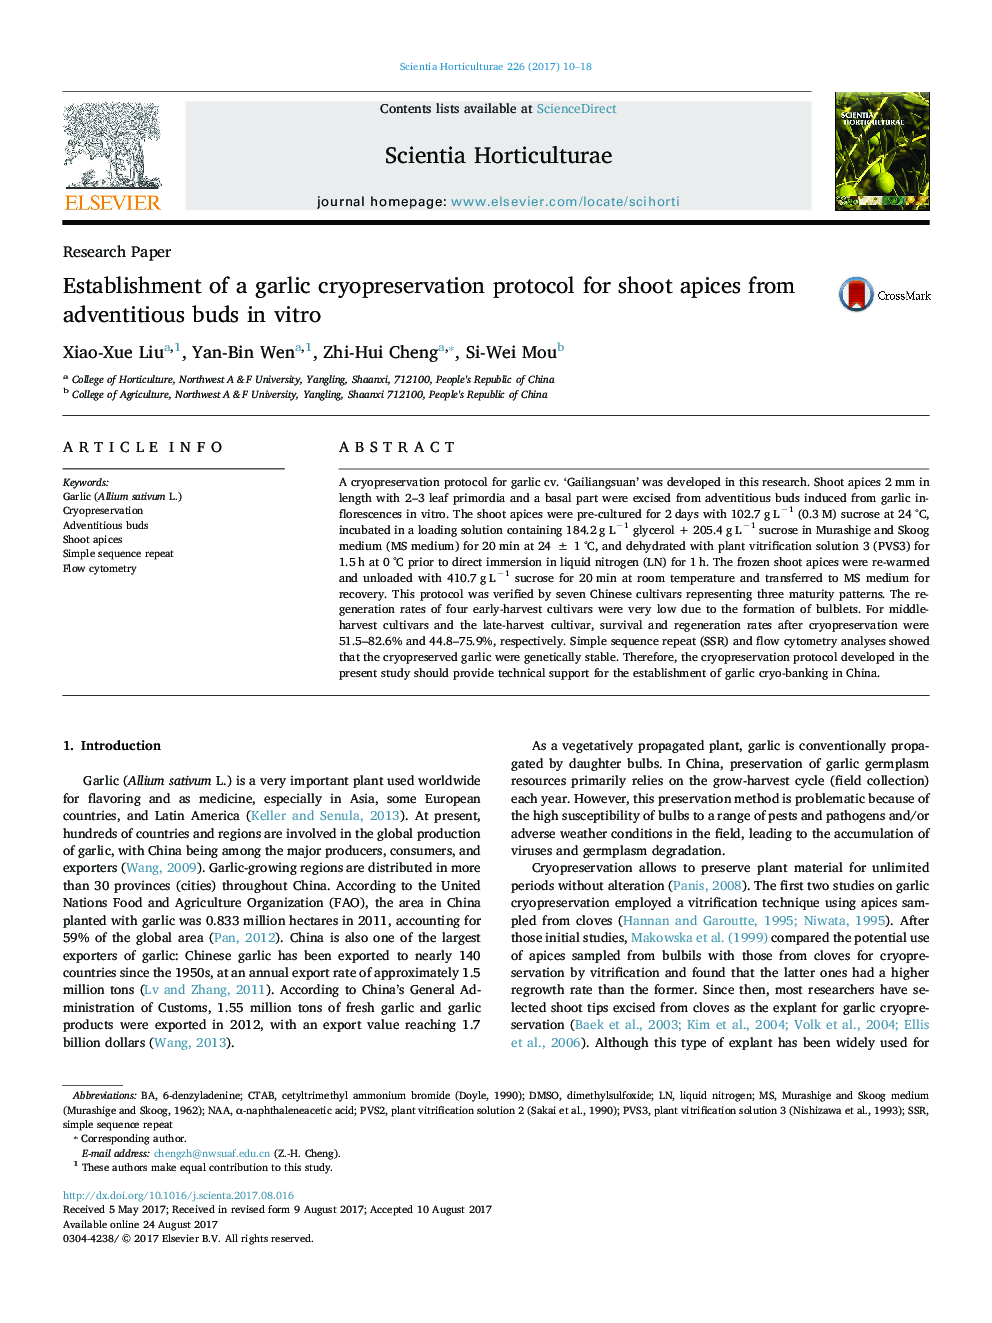 Research PaperEstablishment of a garlic cryopreservation protocol for shoot apices from adventitious buds in vitro